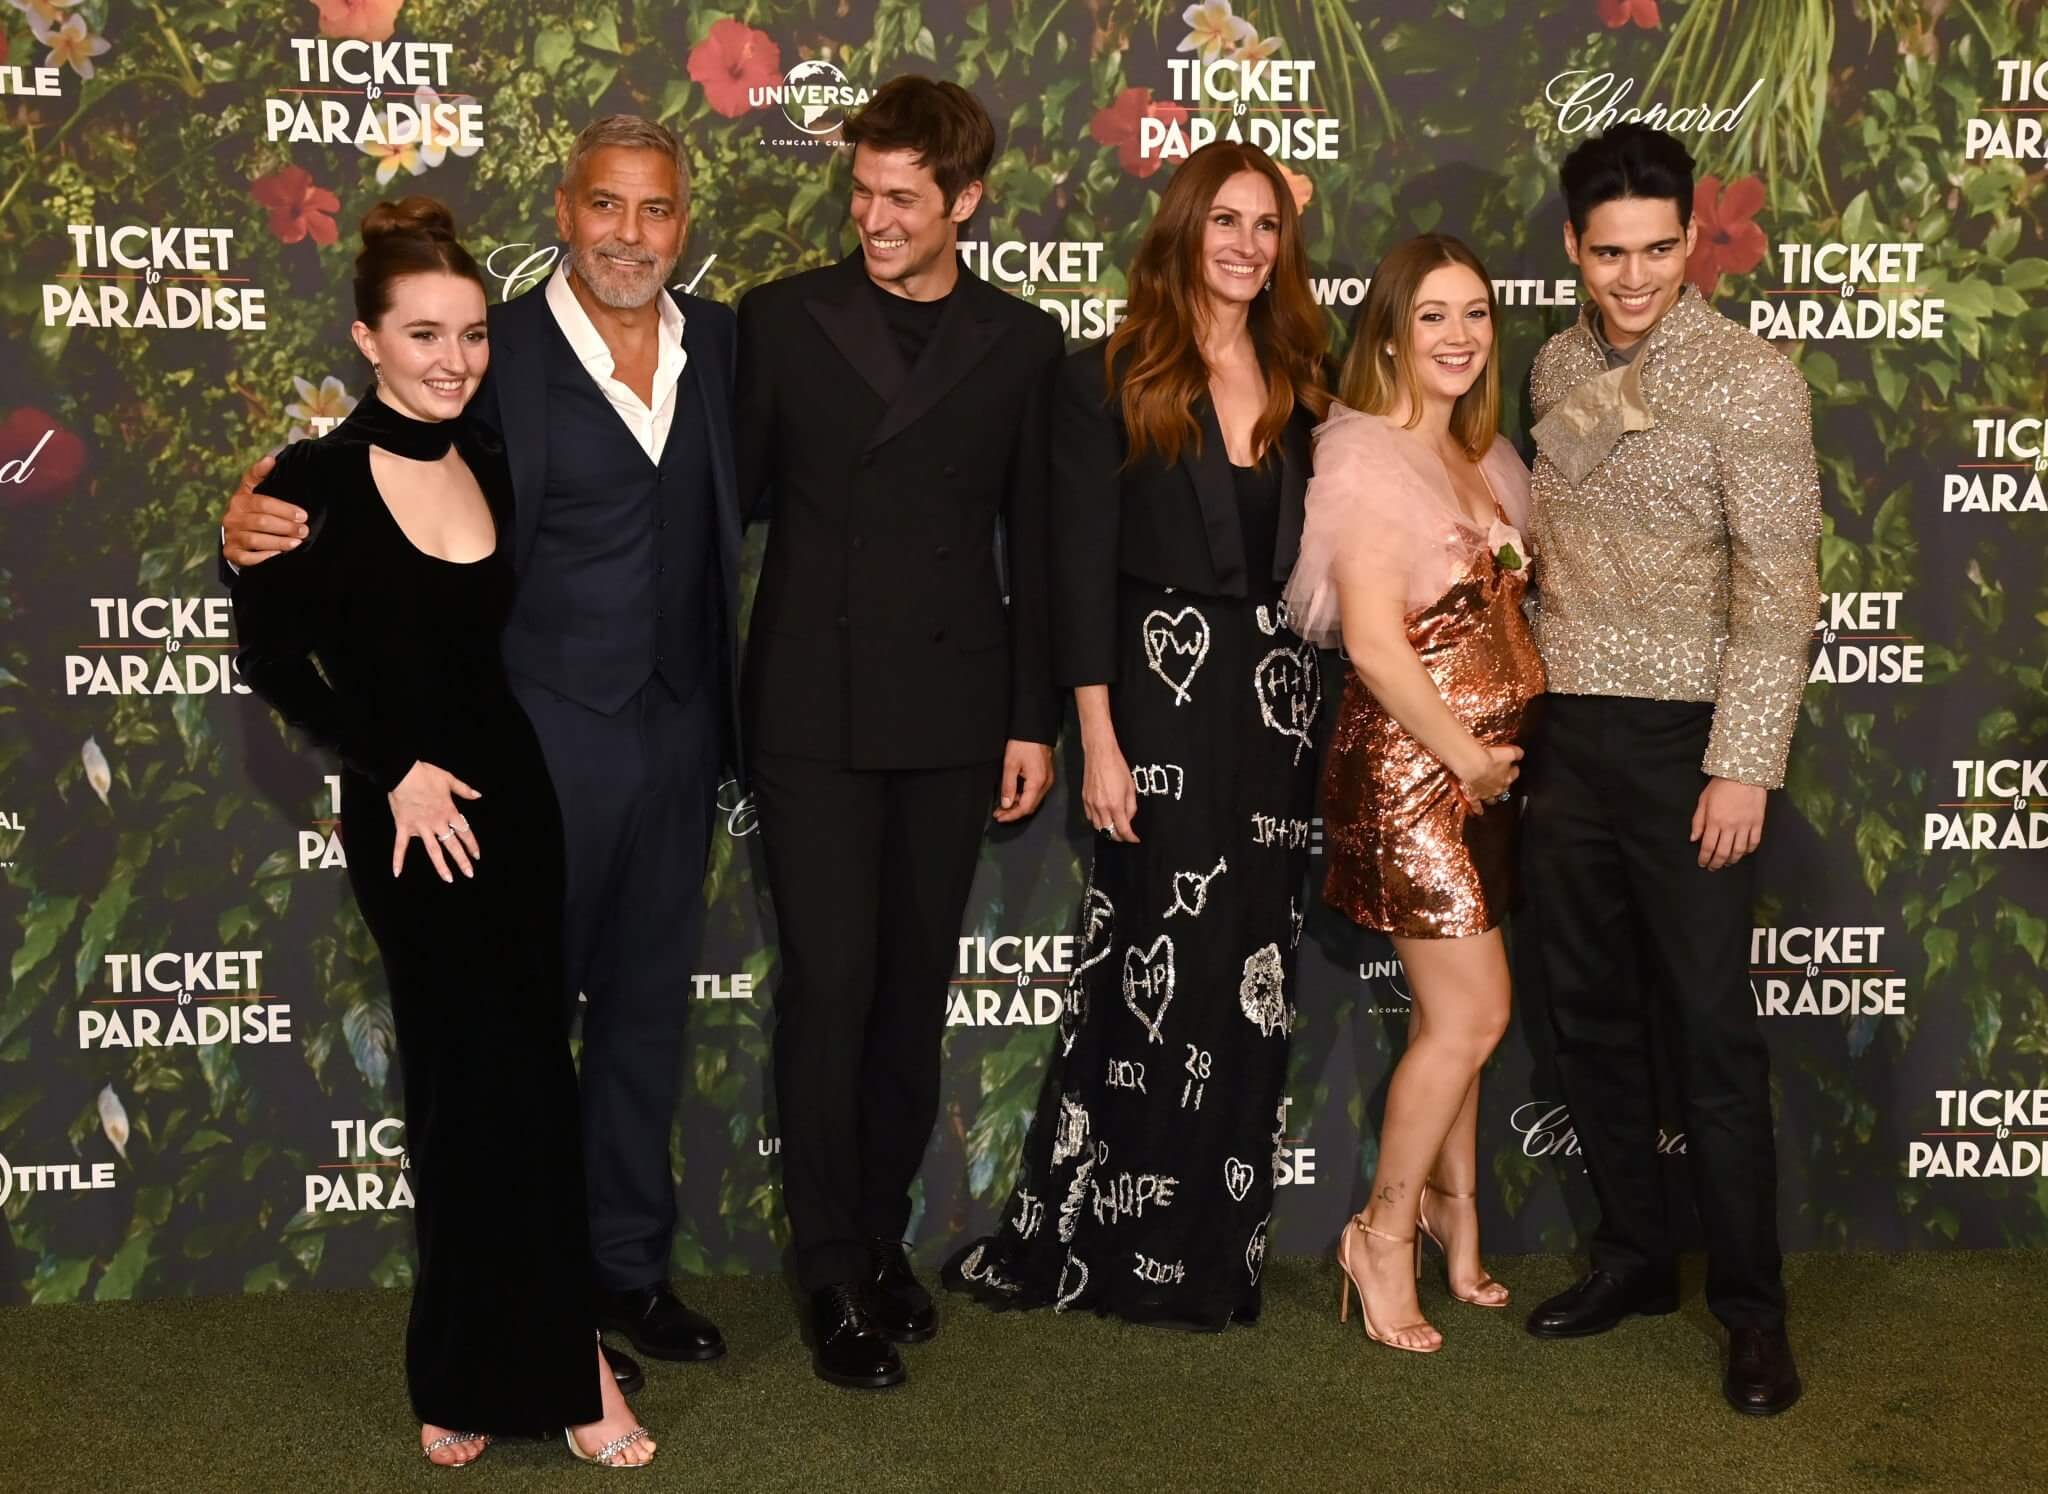  (L to R) Kaitlyn Dever, George Clooney, Lucas Bravo, Julia Roberts, Billie Lourd and Maxime Bouttier attend the World Premiere of "Ticket To Paradise" at Odeon Luxe Leicester Square on September 7, 2022 in London, England.